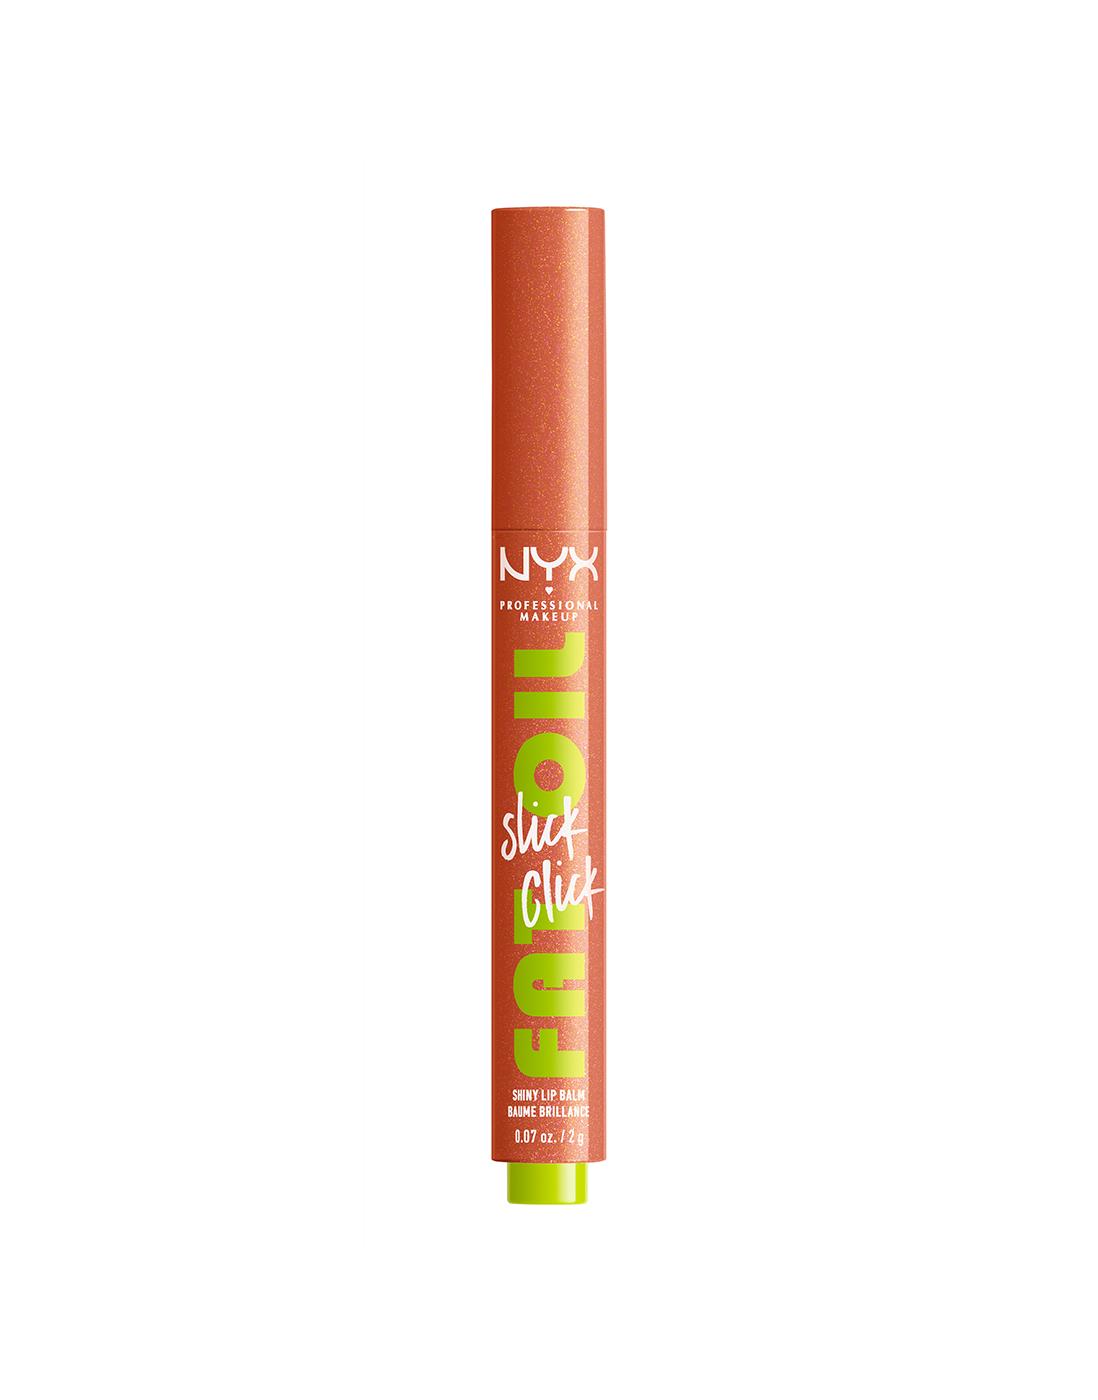 NYX Fat Oil Slick Click Stick - Hits Different; image 1 of 2